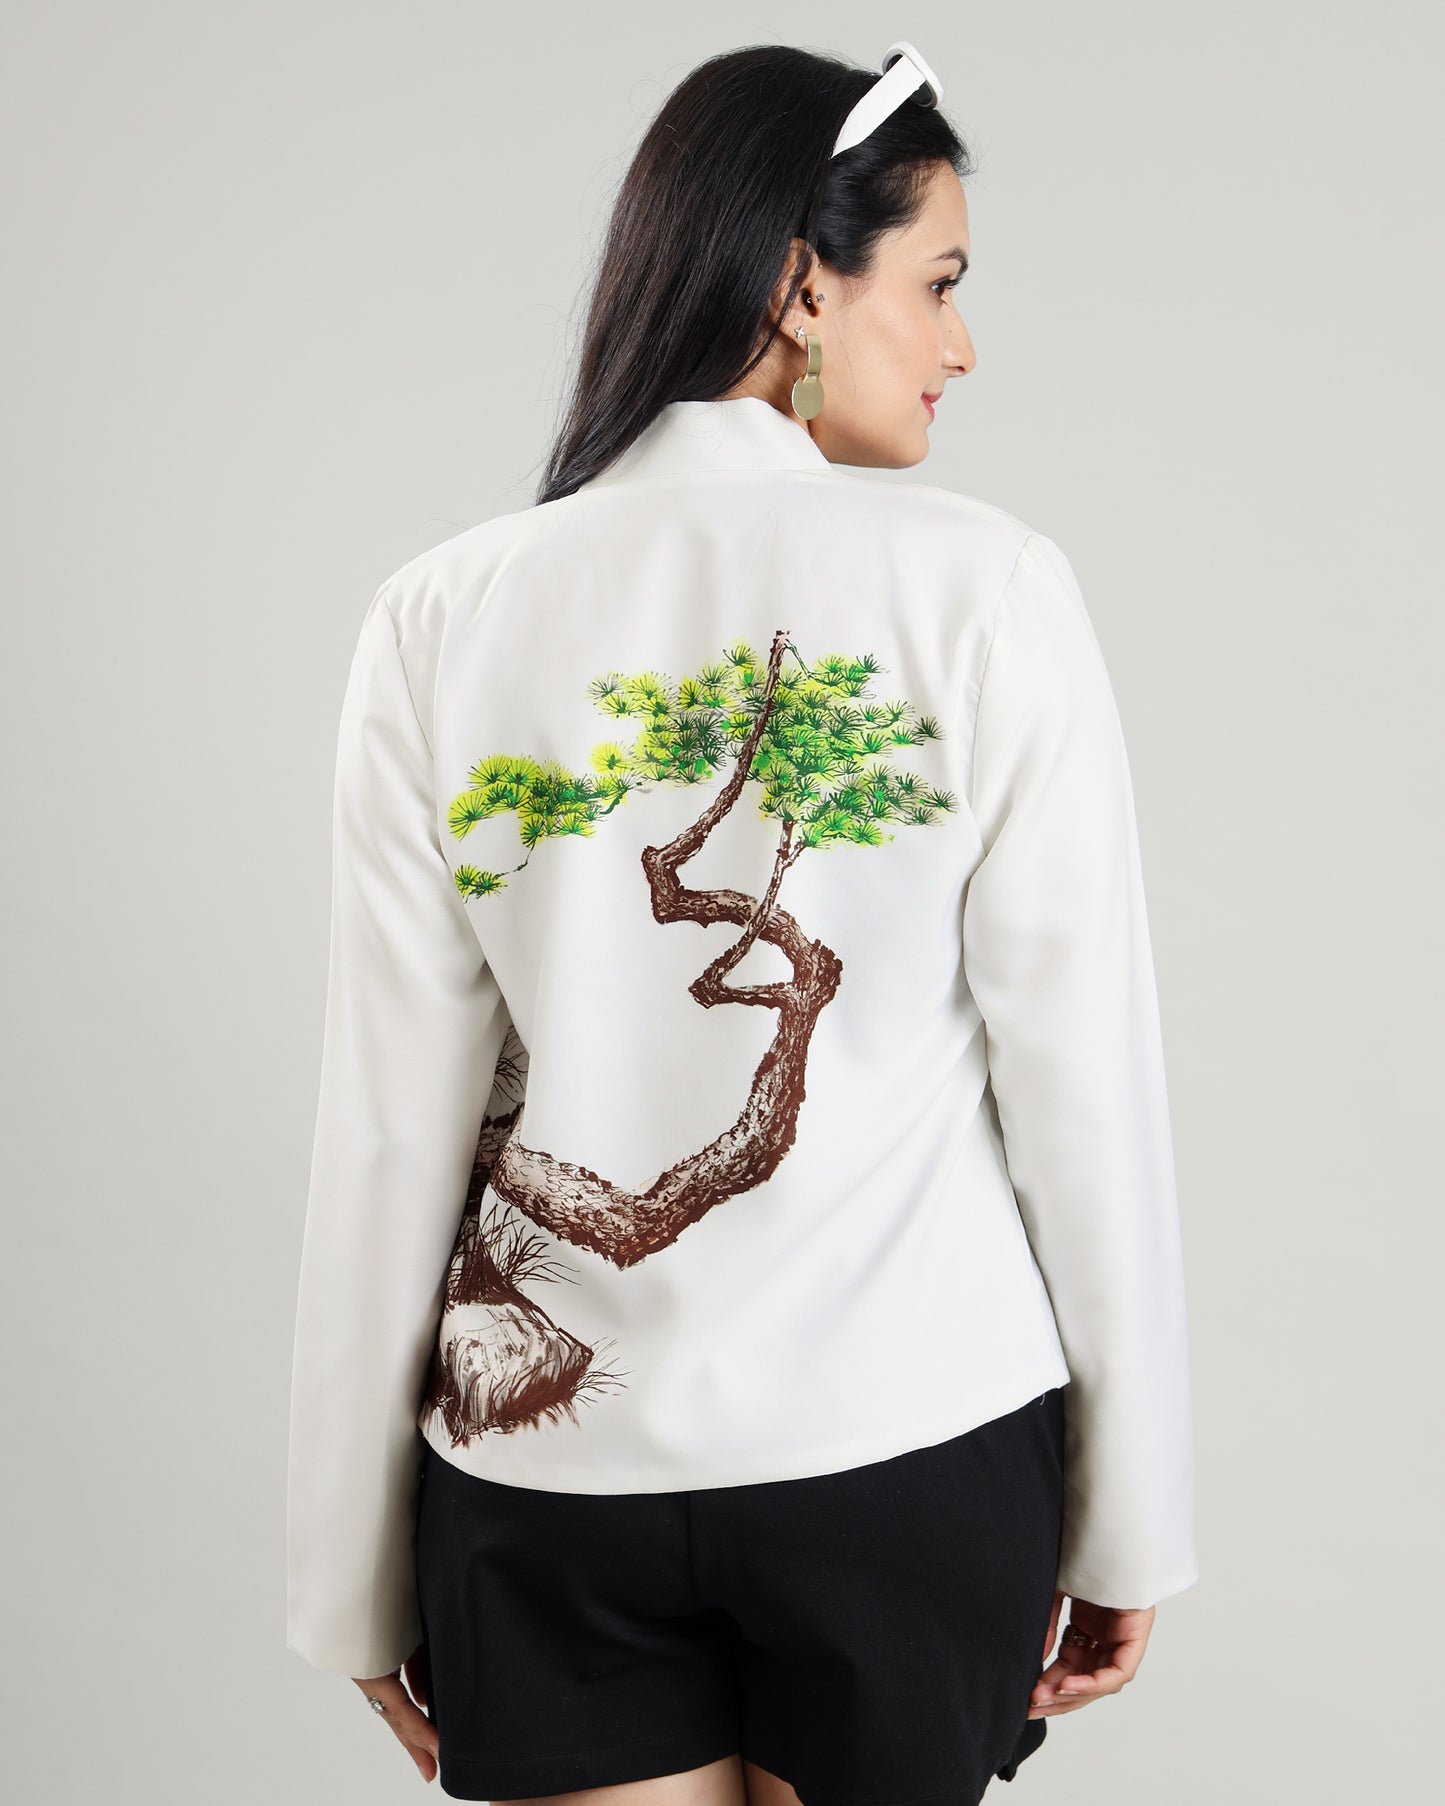 Eco-Chic: White Jacket With Touch Of Nature